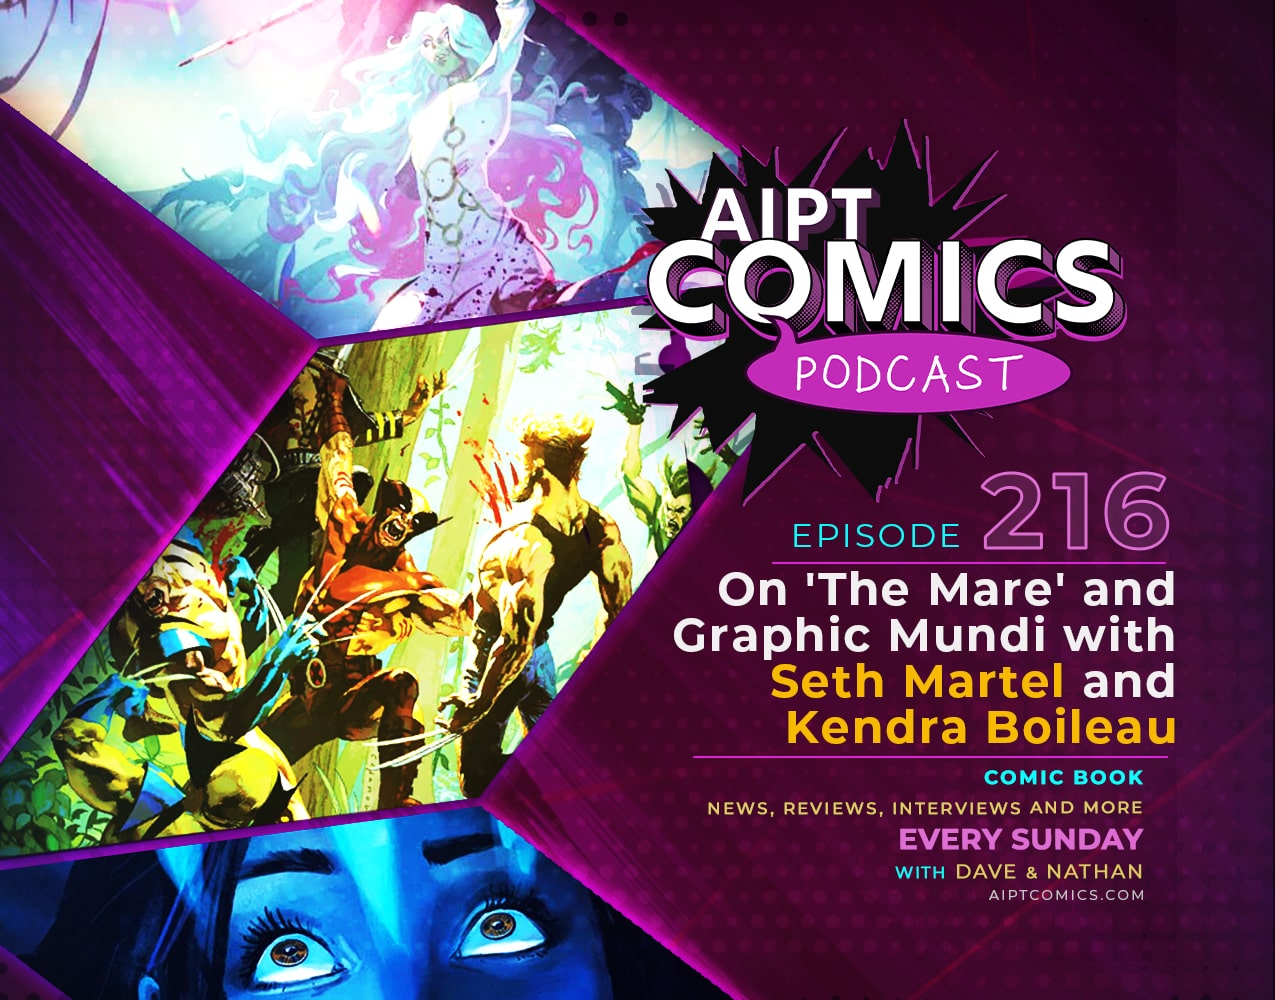 AIPT Comics Podcast episode 216: On 'The Mare' and Graphic Mundi with Seth Martel and Kendra Boileau